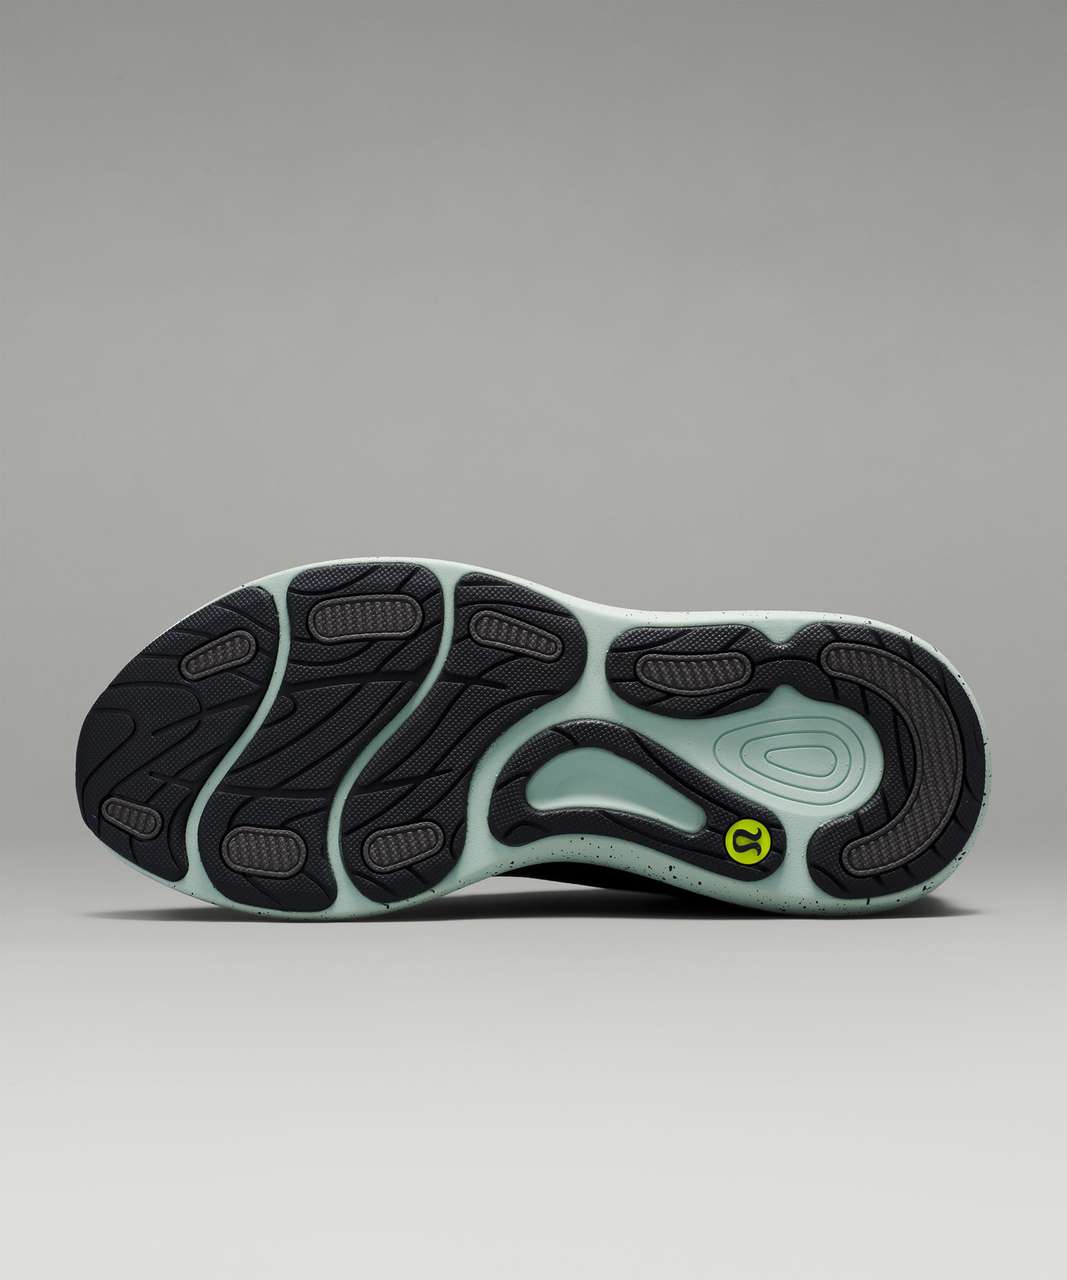 Lululemon Chargefeel Womens Workout Shoe *Winter - Black / Delicate Mint / Highlight Yellow